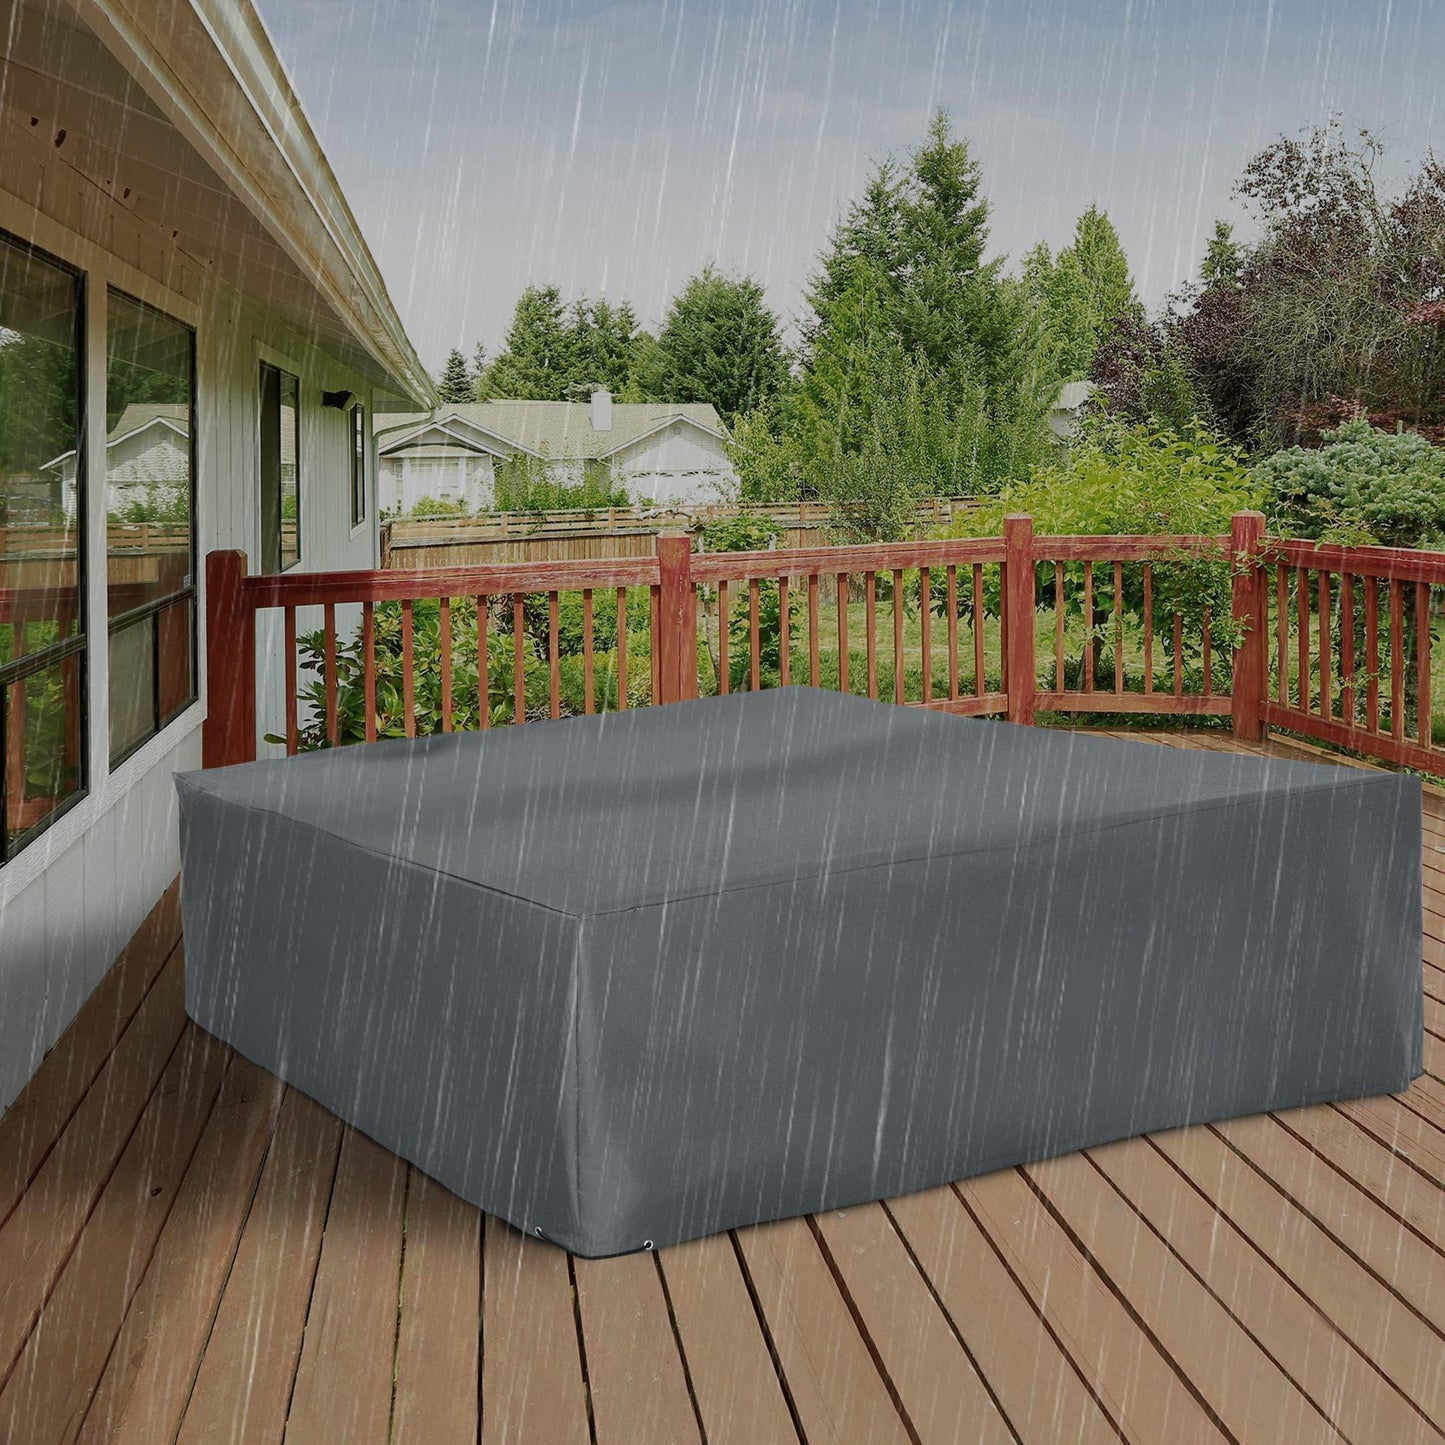 Outsunny Waterproof Outdoor Furniture Cover - ALL4U RETAILER LTD